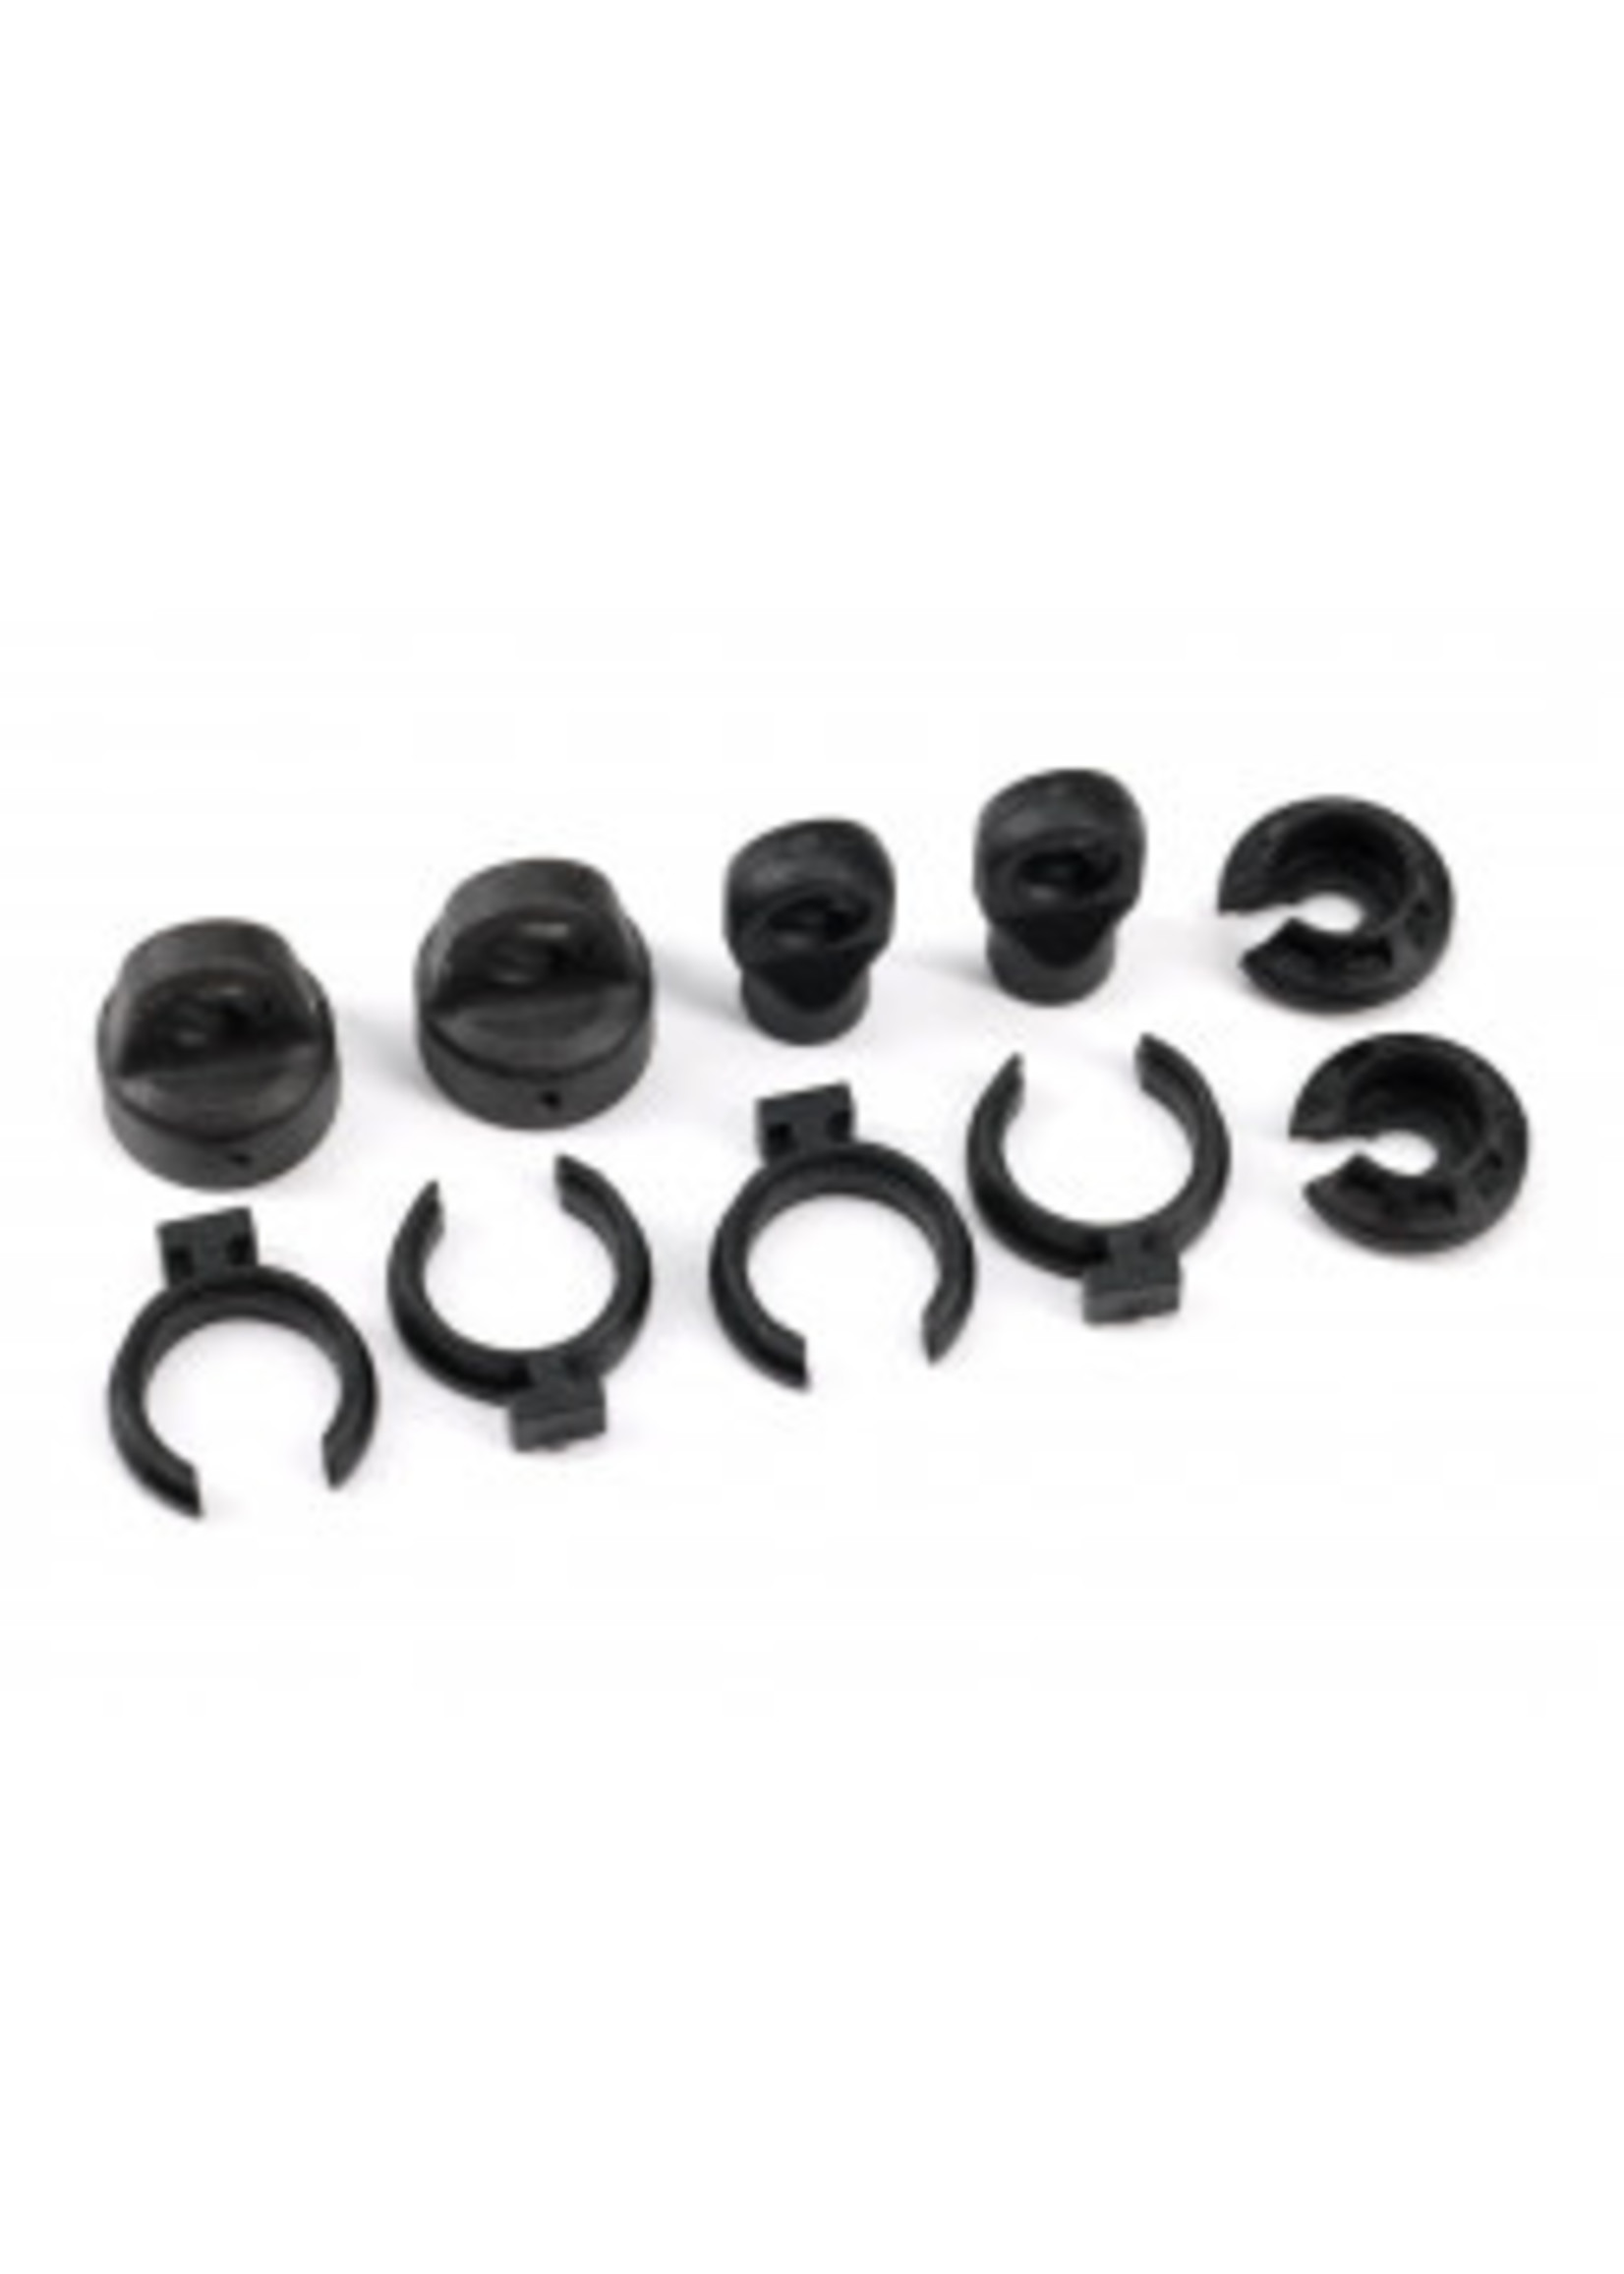 Traxxas 9762A Shock Caps/Spacers